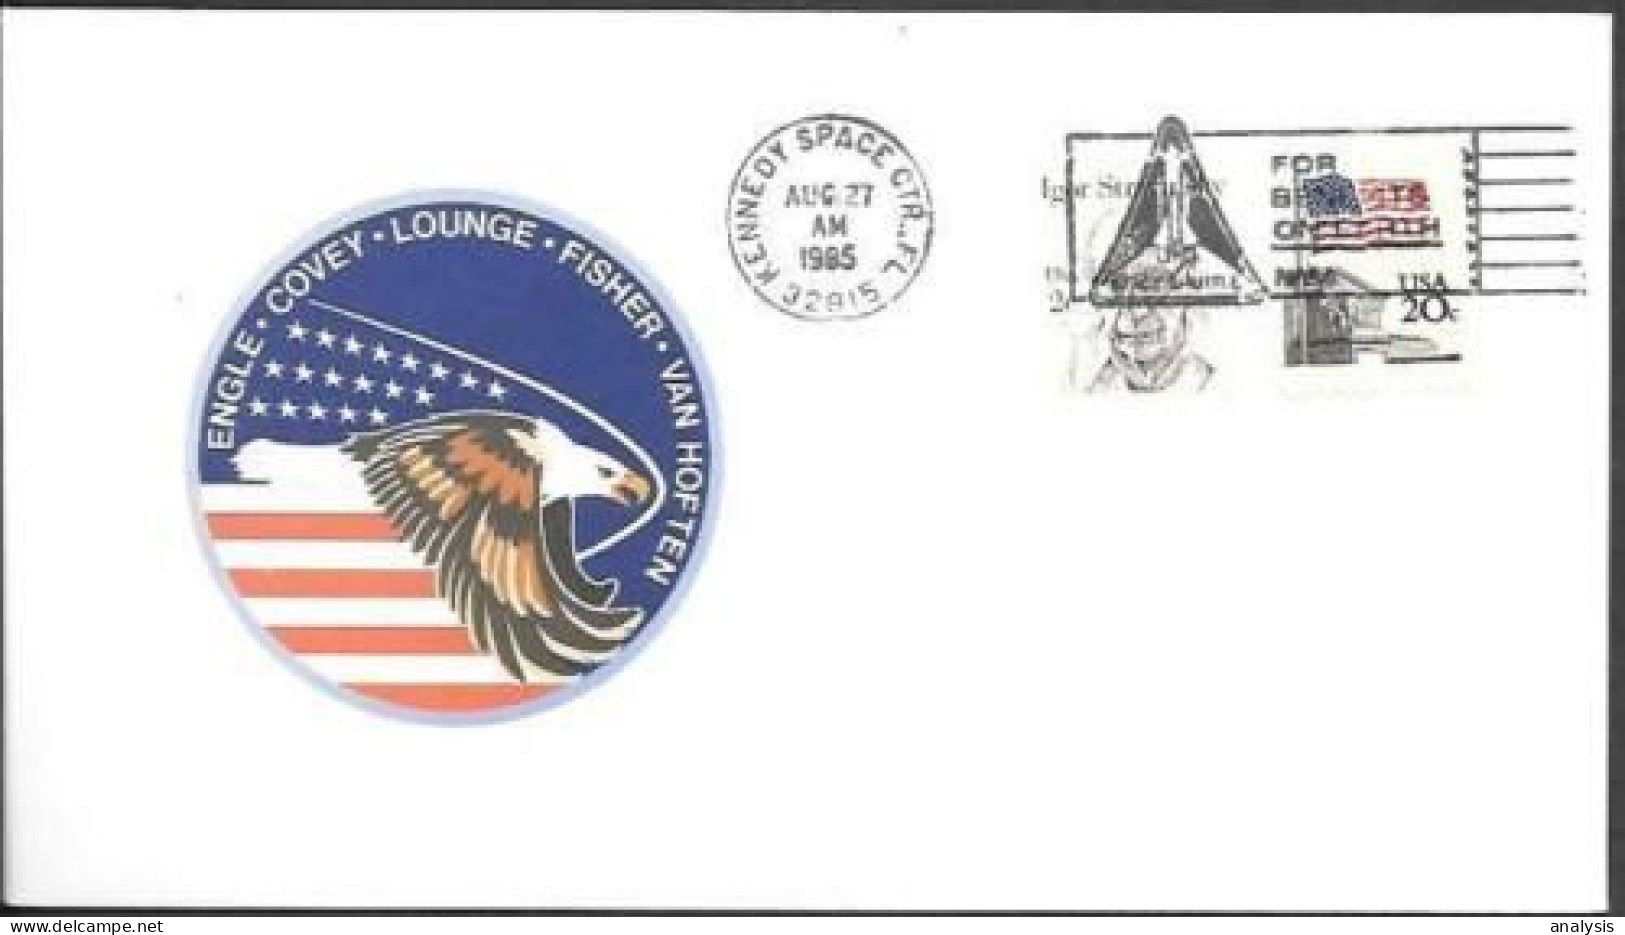 US Space Cover 1985. Discovery STS-51I Launch. KSC - United States